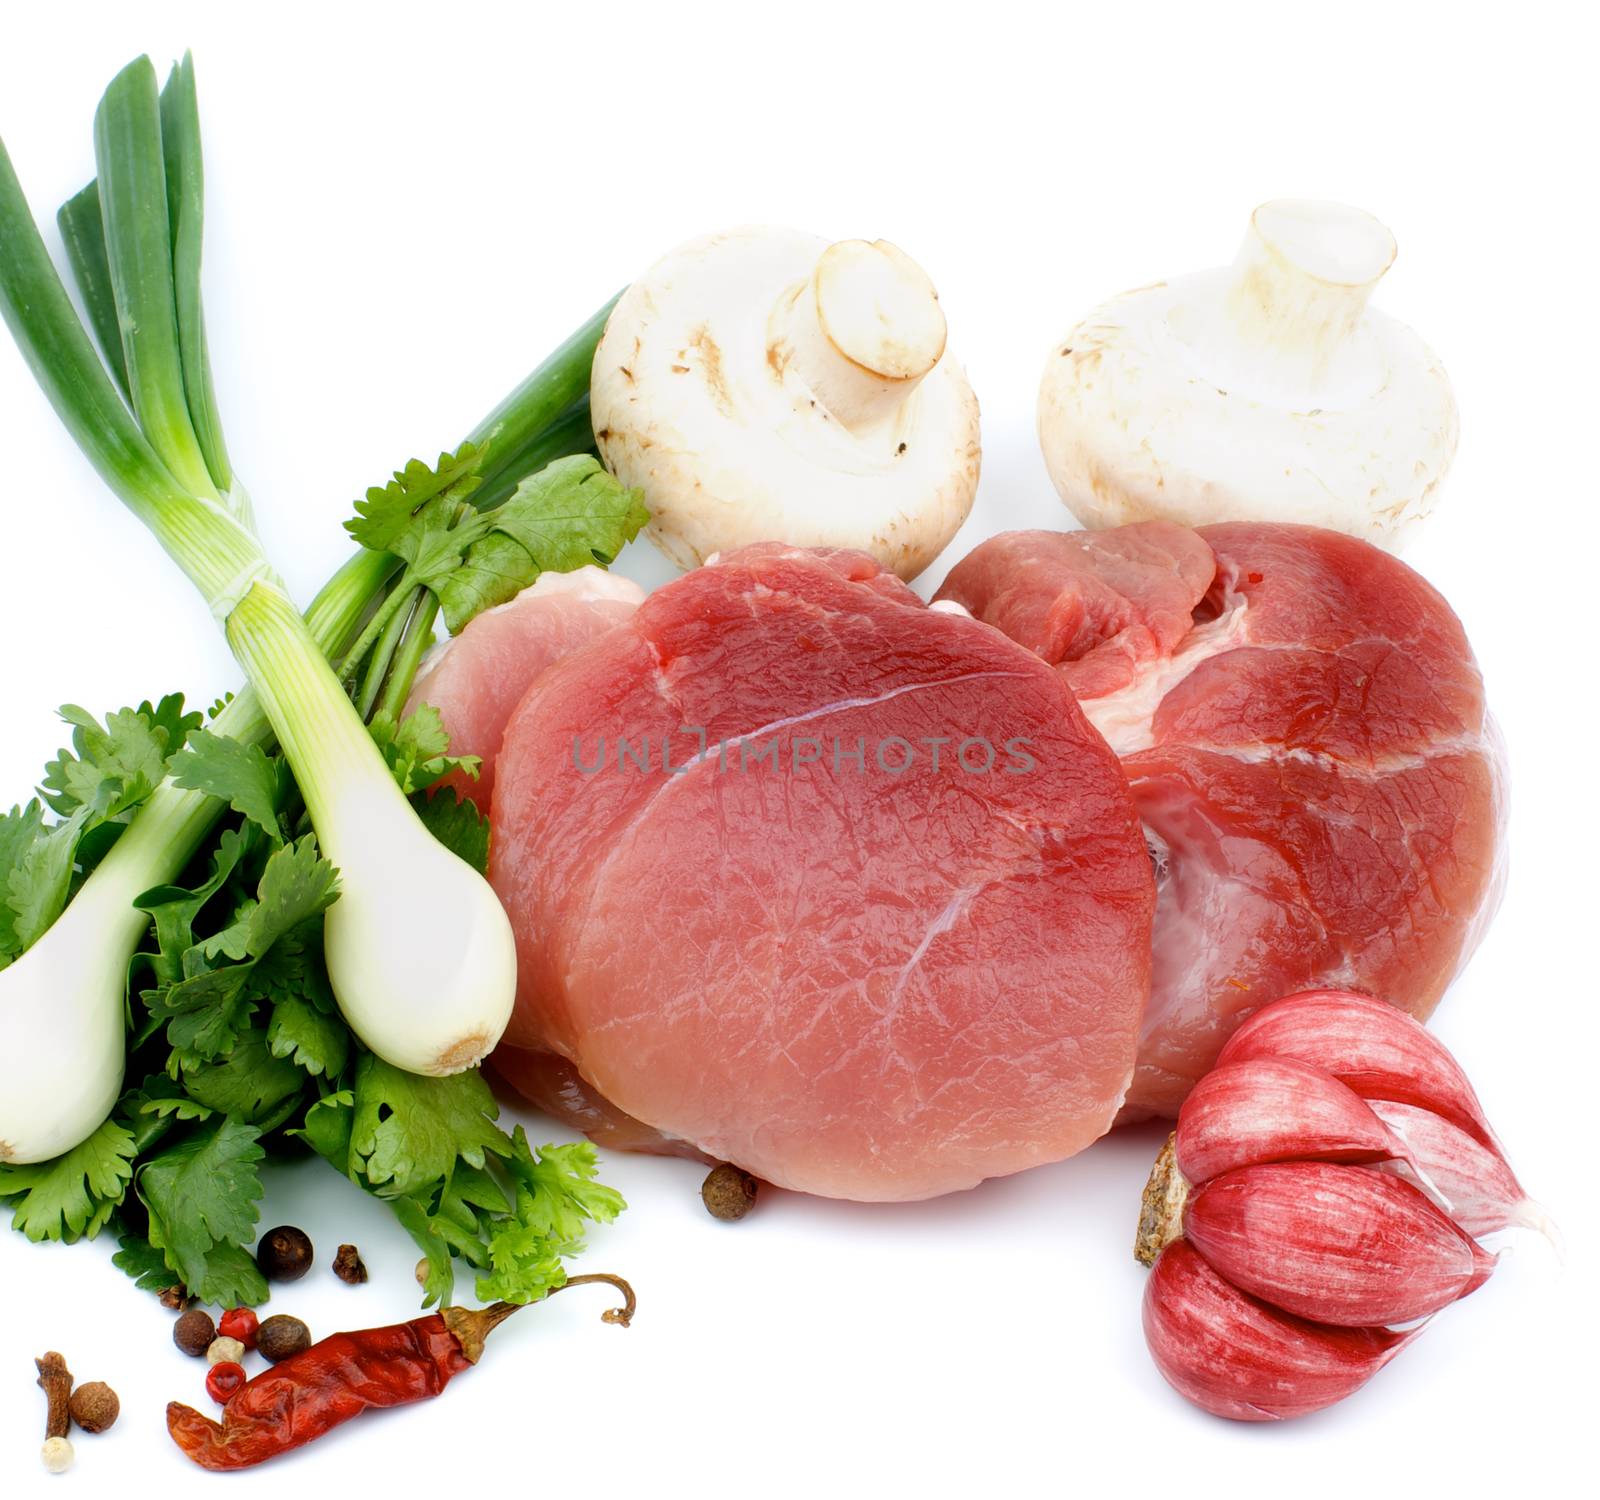 Arrangement of Perfect Piece of Boneless Raw Pork with Parsley, Spring Onion, Spices and Edible Mushrooms isolated on white background